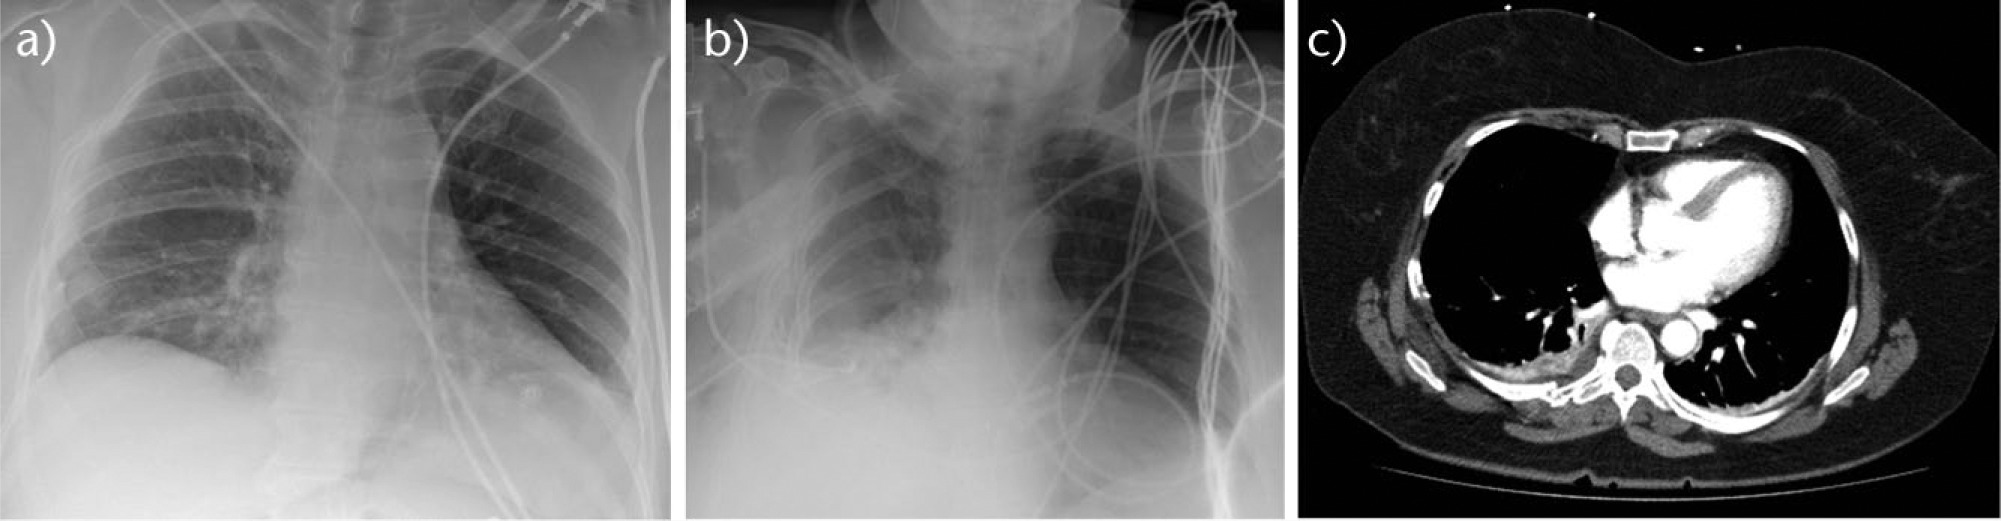 Fig. 3 
            a) Initial radiograph showing right-sided flail chest on admission; b) Radiograph taken two days later showing secondary collapse and loss of volume; c) Cross-sectional CT scan on admission demonstrating posterior fractures and a flail chest.
          